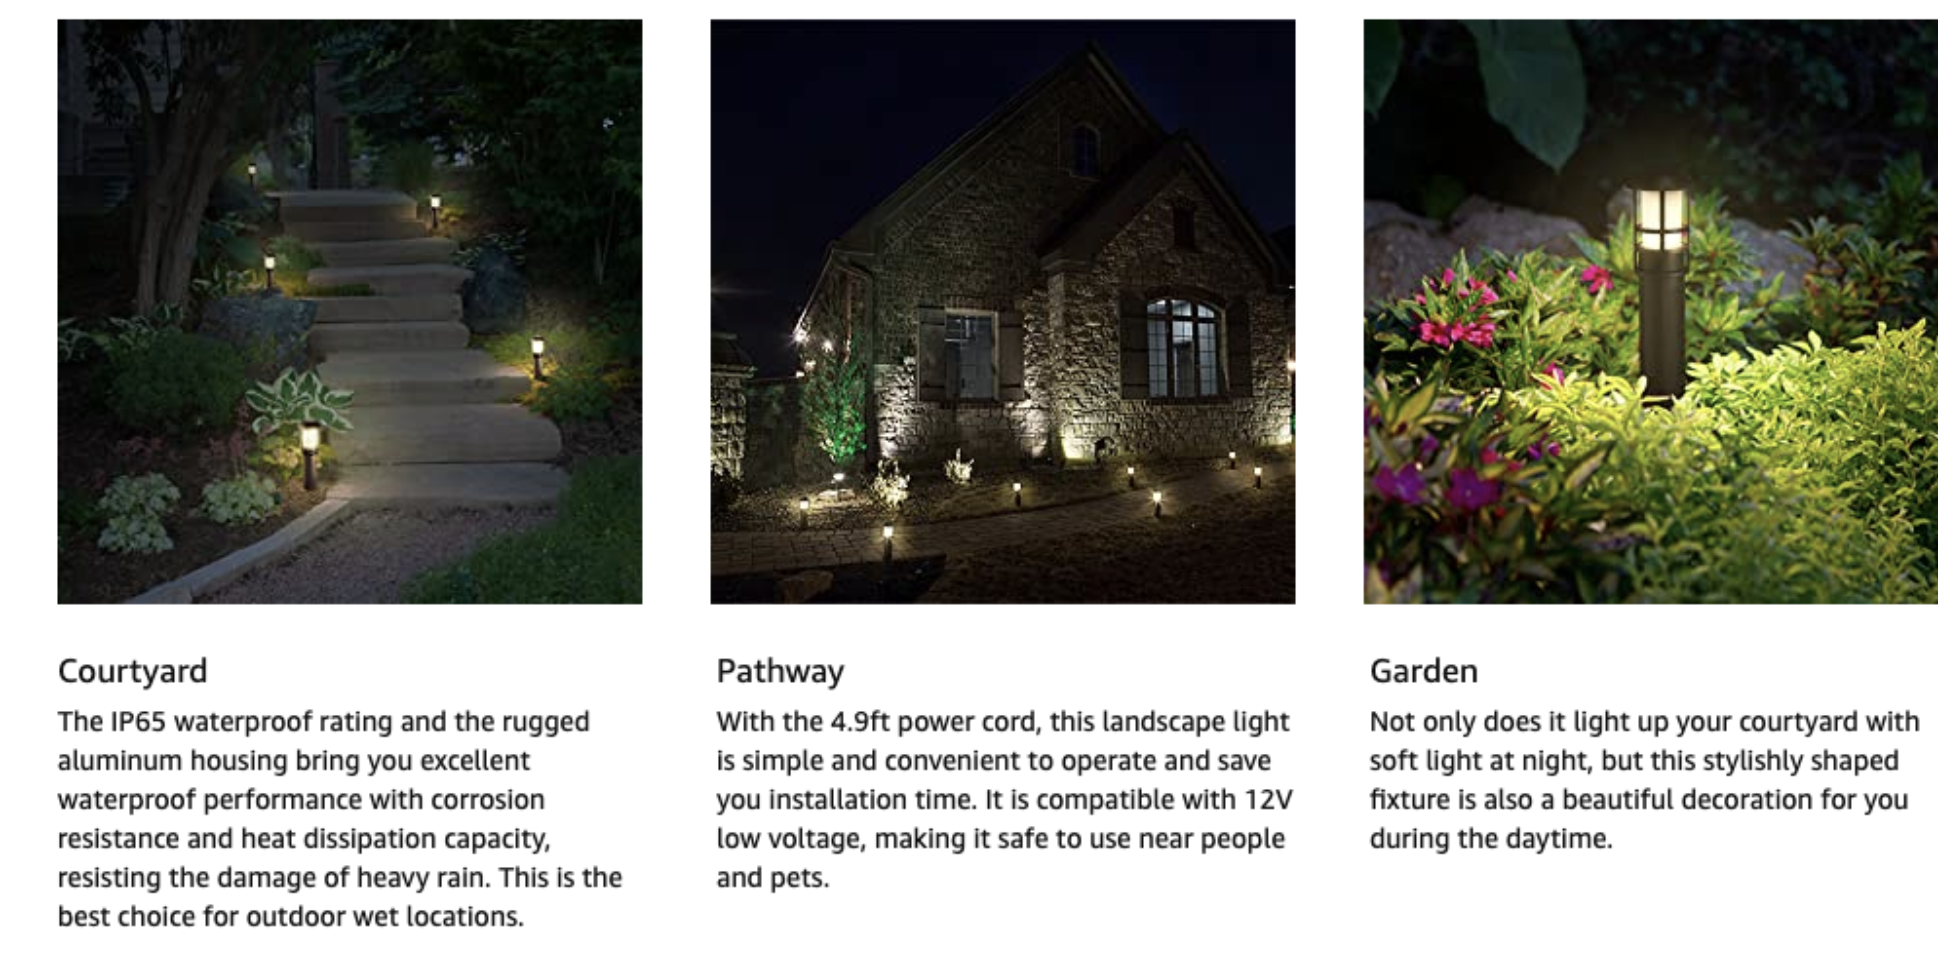 LEONLITE LED Landscape Pathway Light, 3W (18W Eqv.), DC 12V Low Voltage,  IP65 Waterproof, CRI90+, ETL Listed, 3000K Warm White, Aluminum Housing  with Ground Stake, Outdoor Pathway Garden Yard Patio Lamp 4-Pack